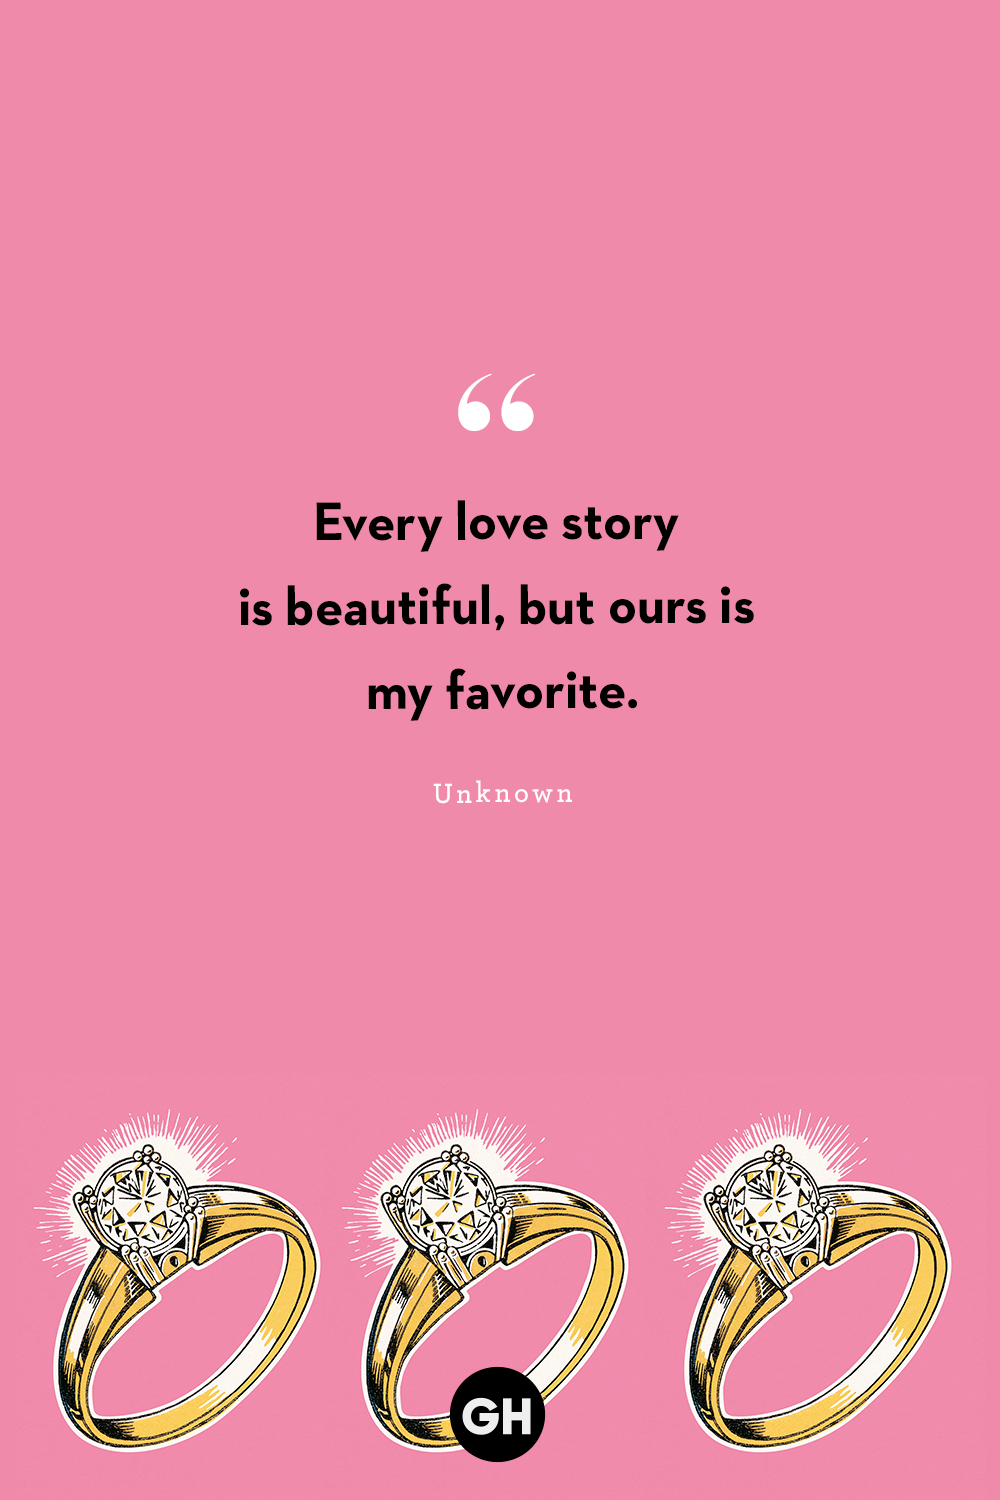 50 Best Engagement Quotes - Engagement Instagram Cpations